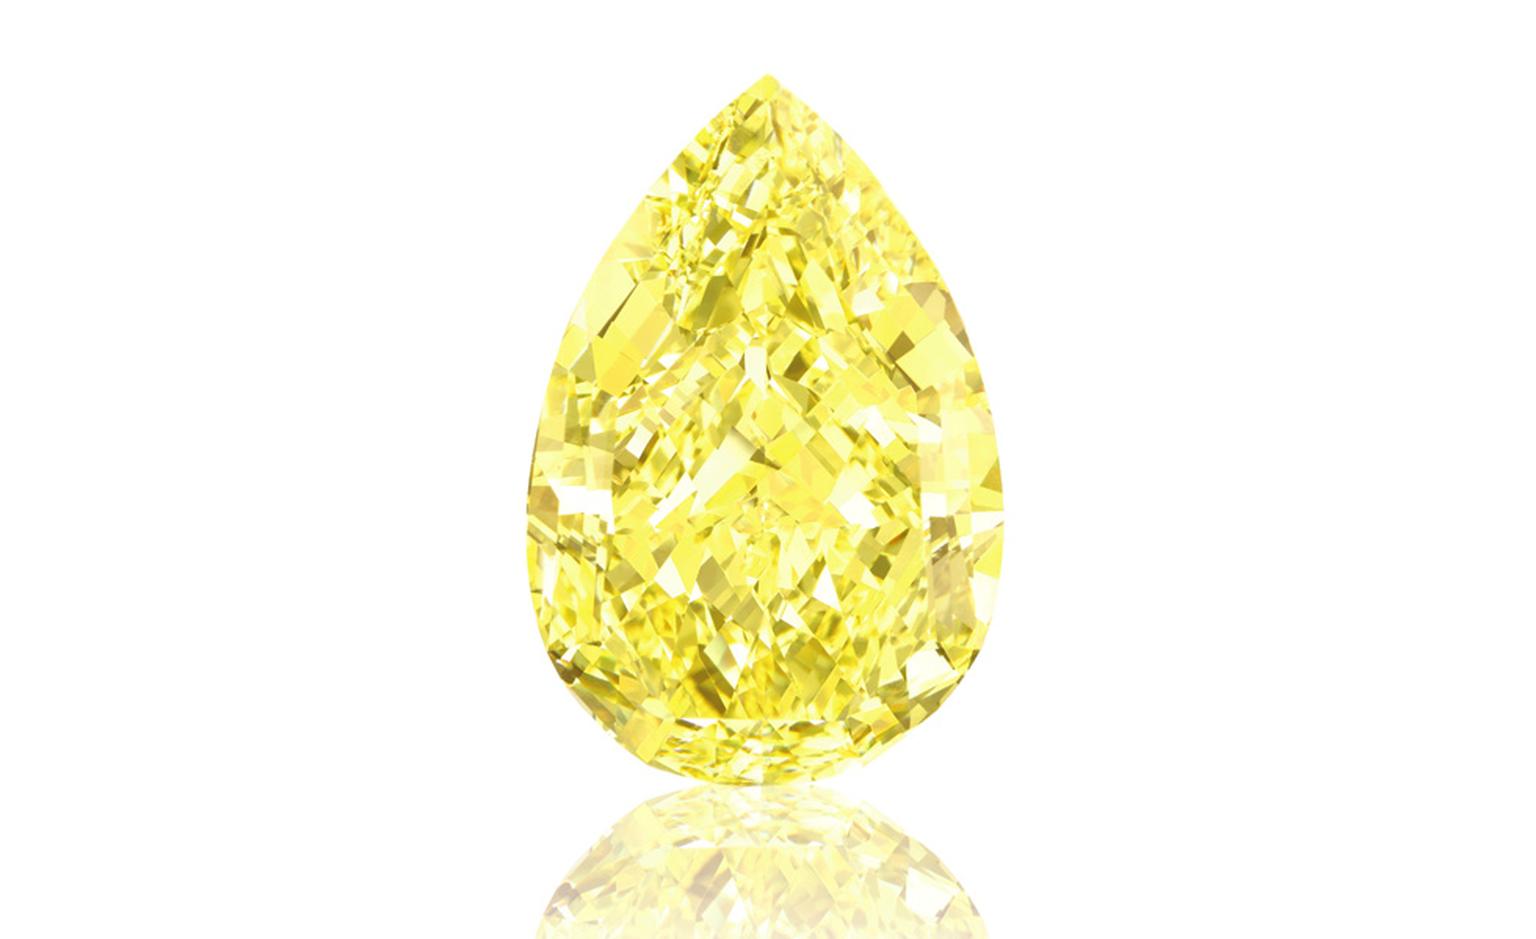 Sun-drop yellow diamond at 110.03 cts sold for hammer price of 10,000,000 CHF at Sotheby's in Geneva